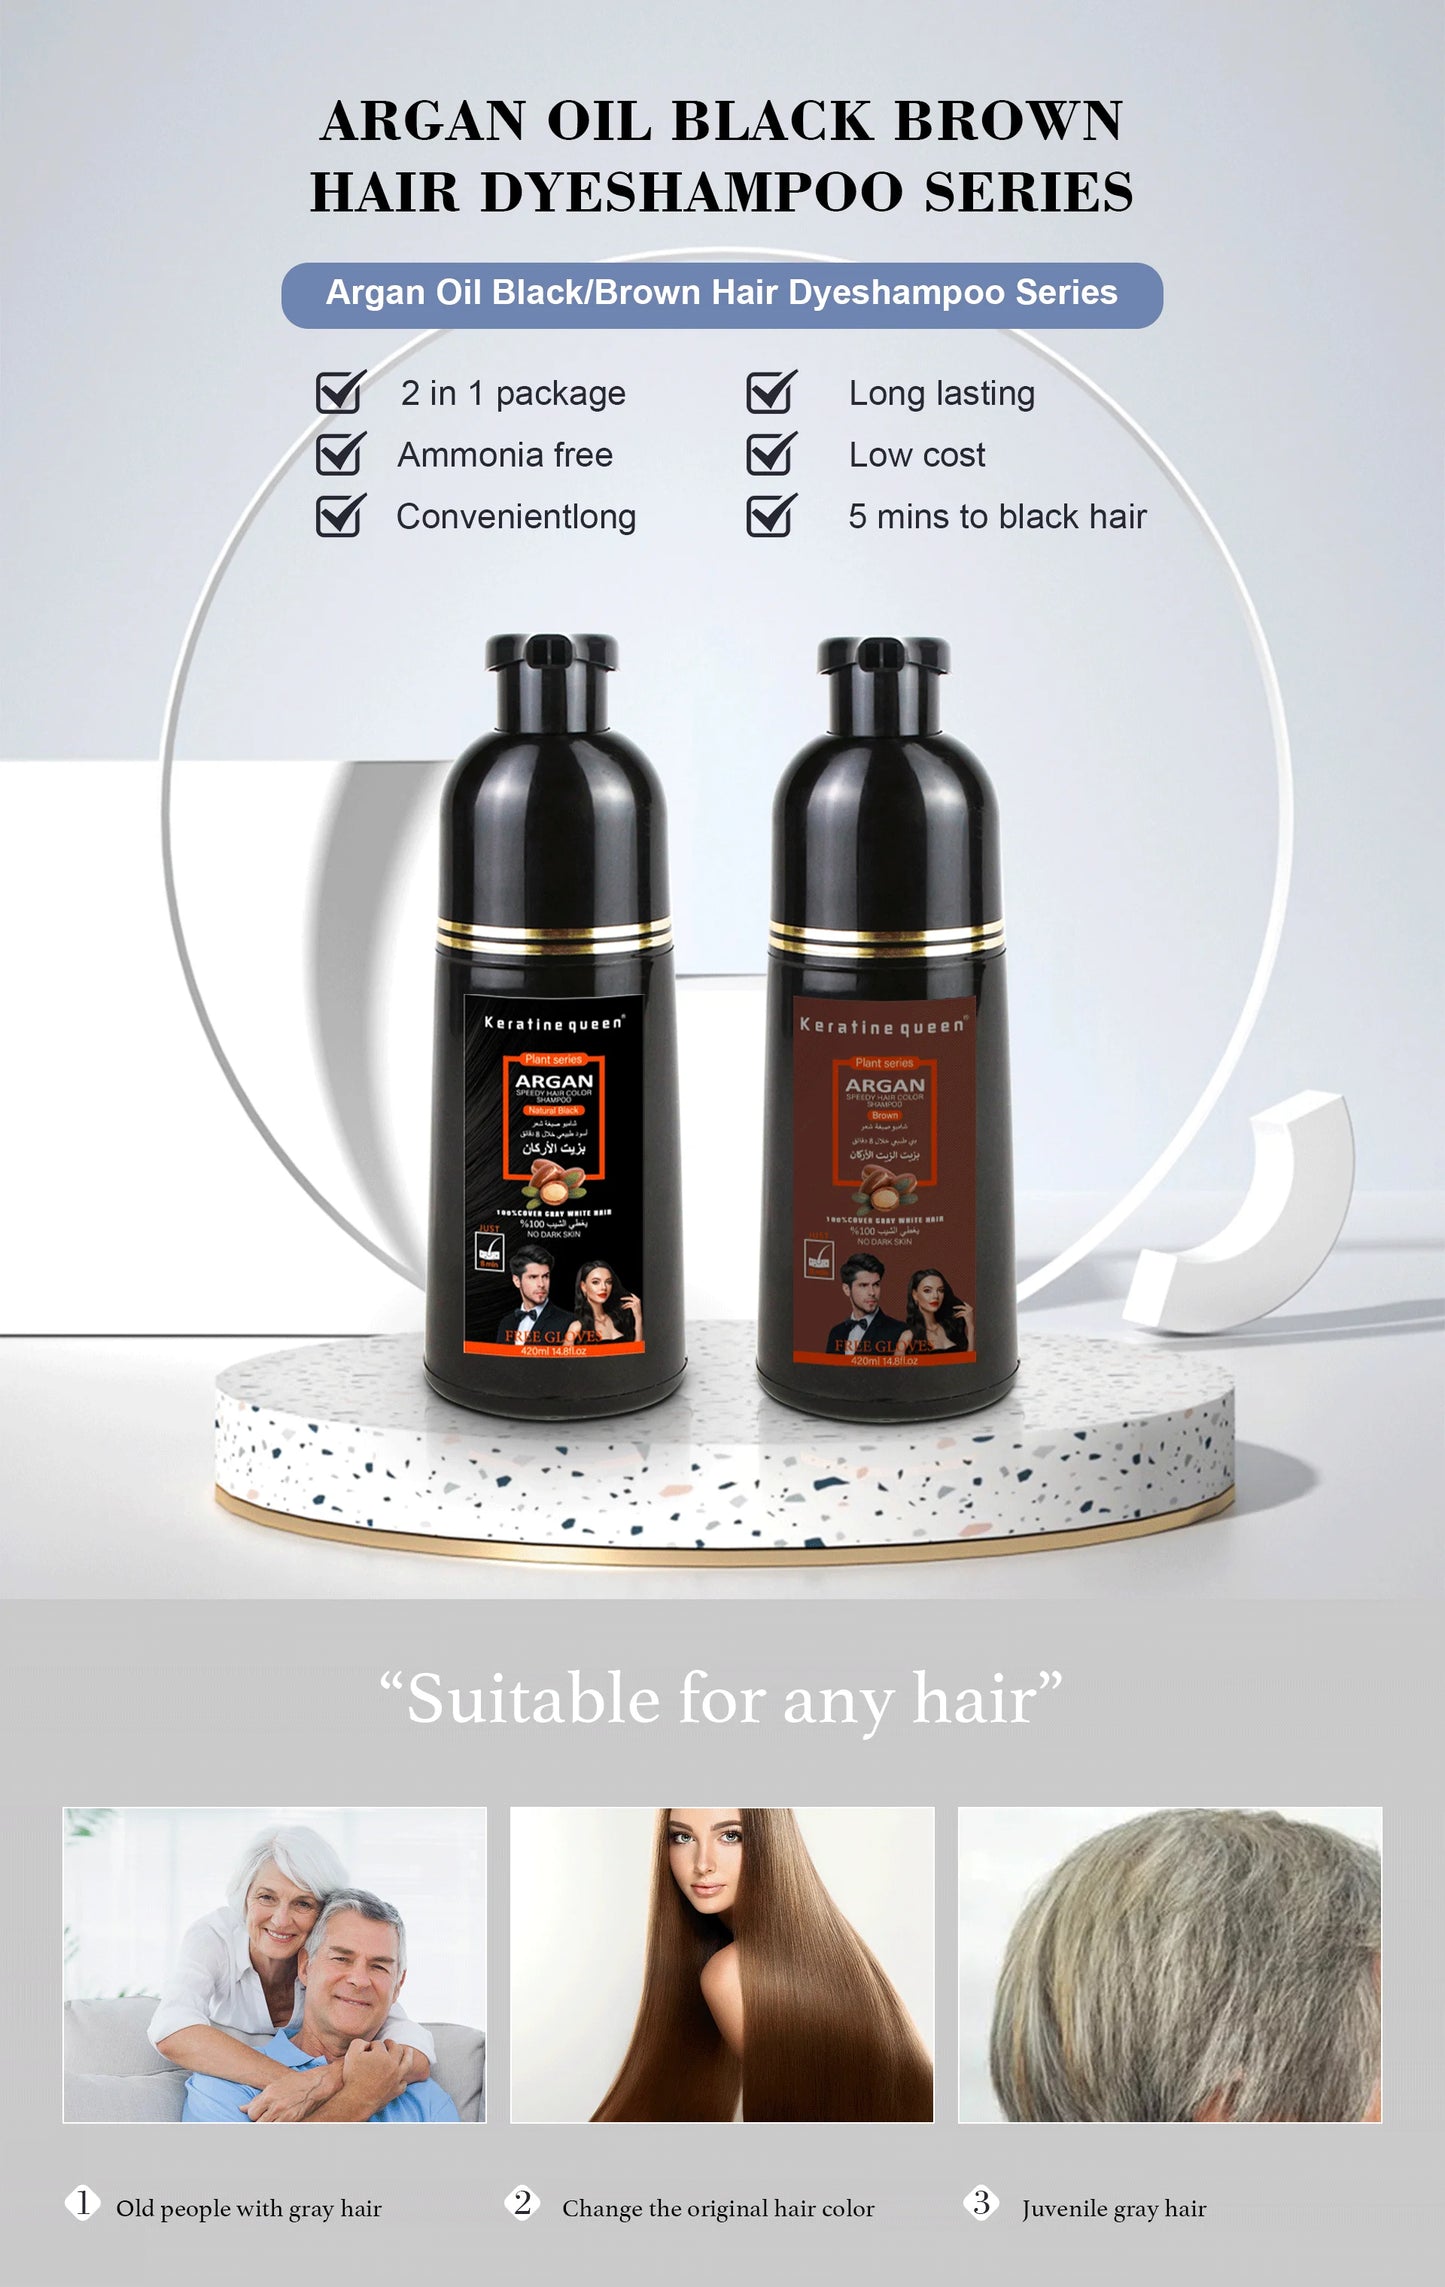 Instant Hair Color Shampoo In Pakistan + Conditioner (Dark Brown) – Shampoo Hair Dye For 10 in 1